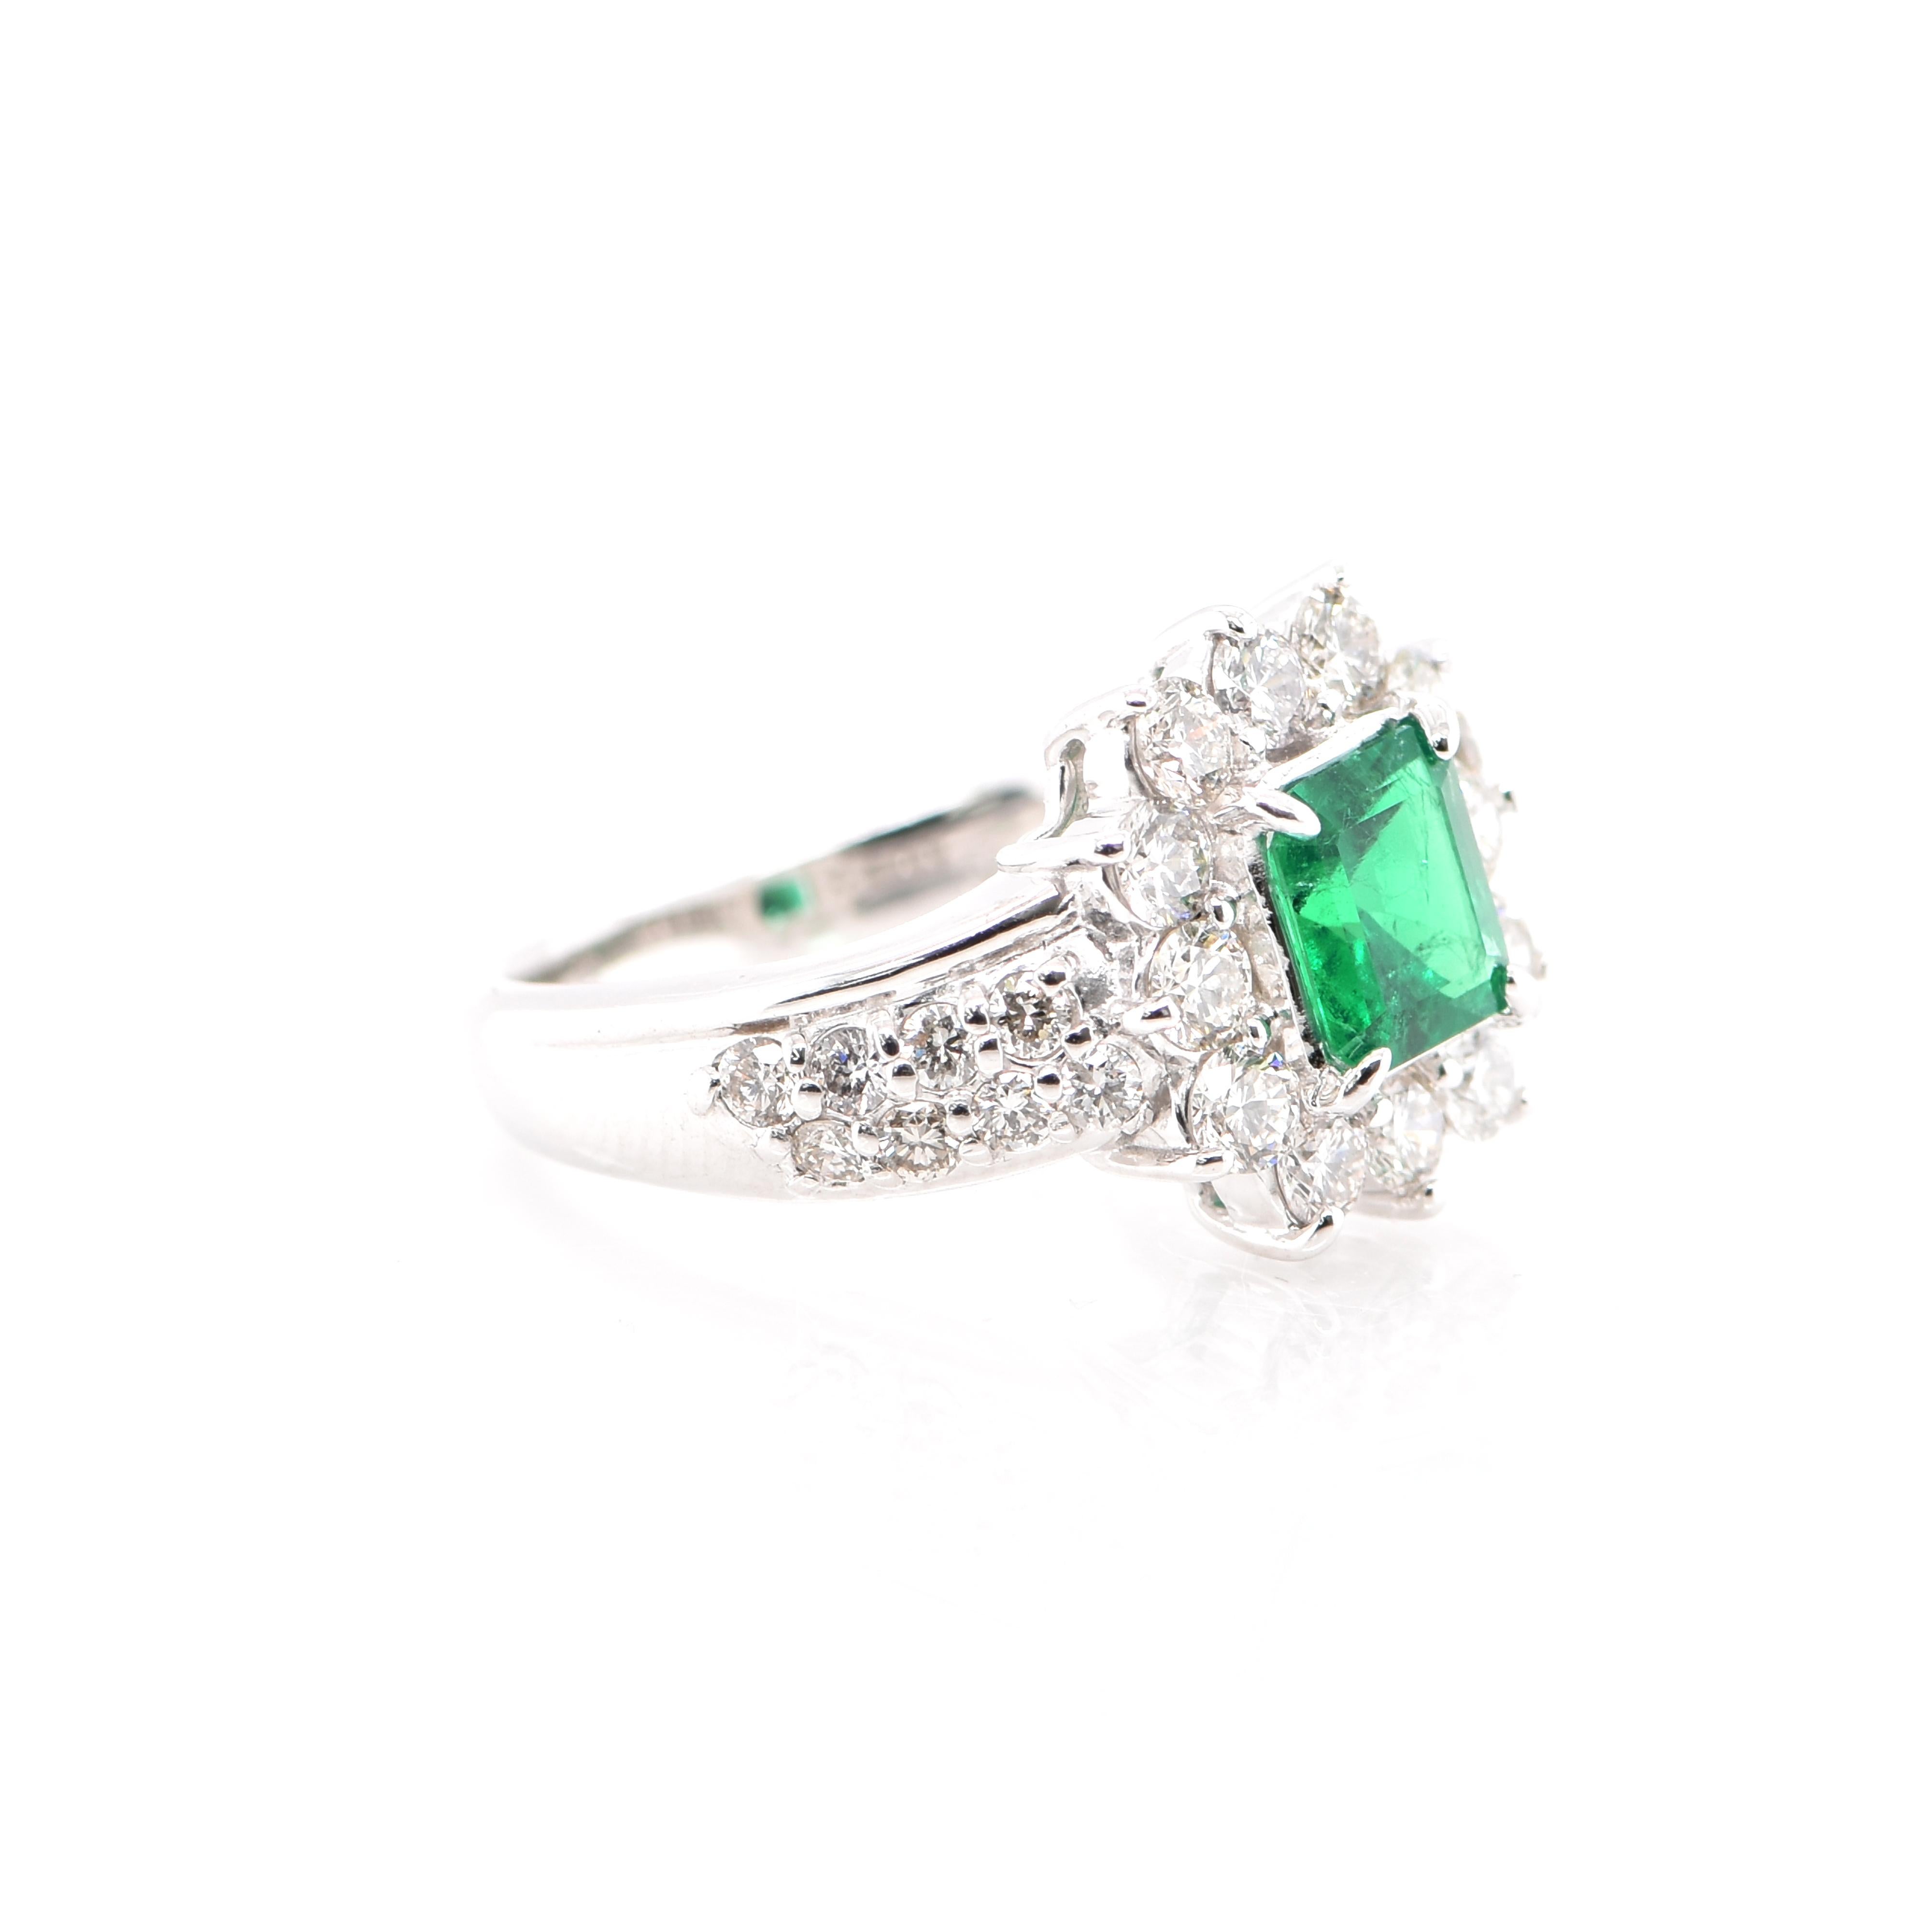 Emerald Cut 0.90 Carat Natural Vivid Green Emerald and Diamond Ring Set in Platinum For Sale